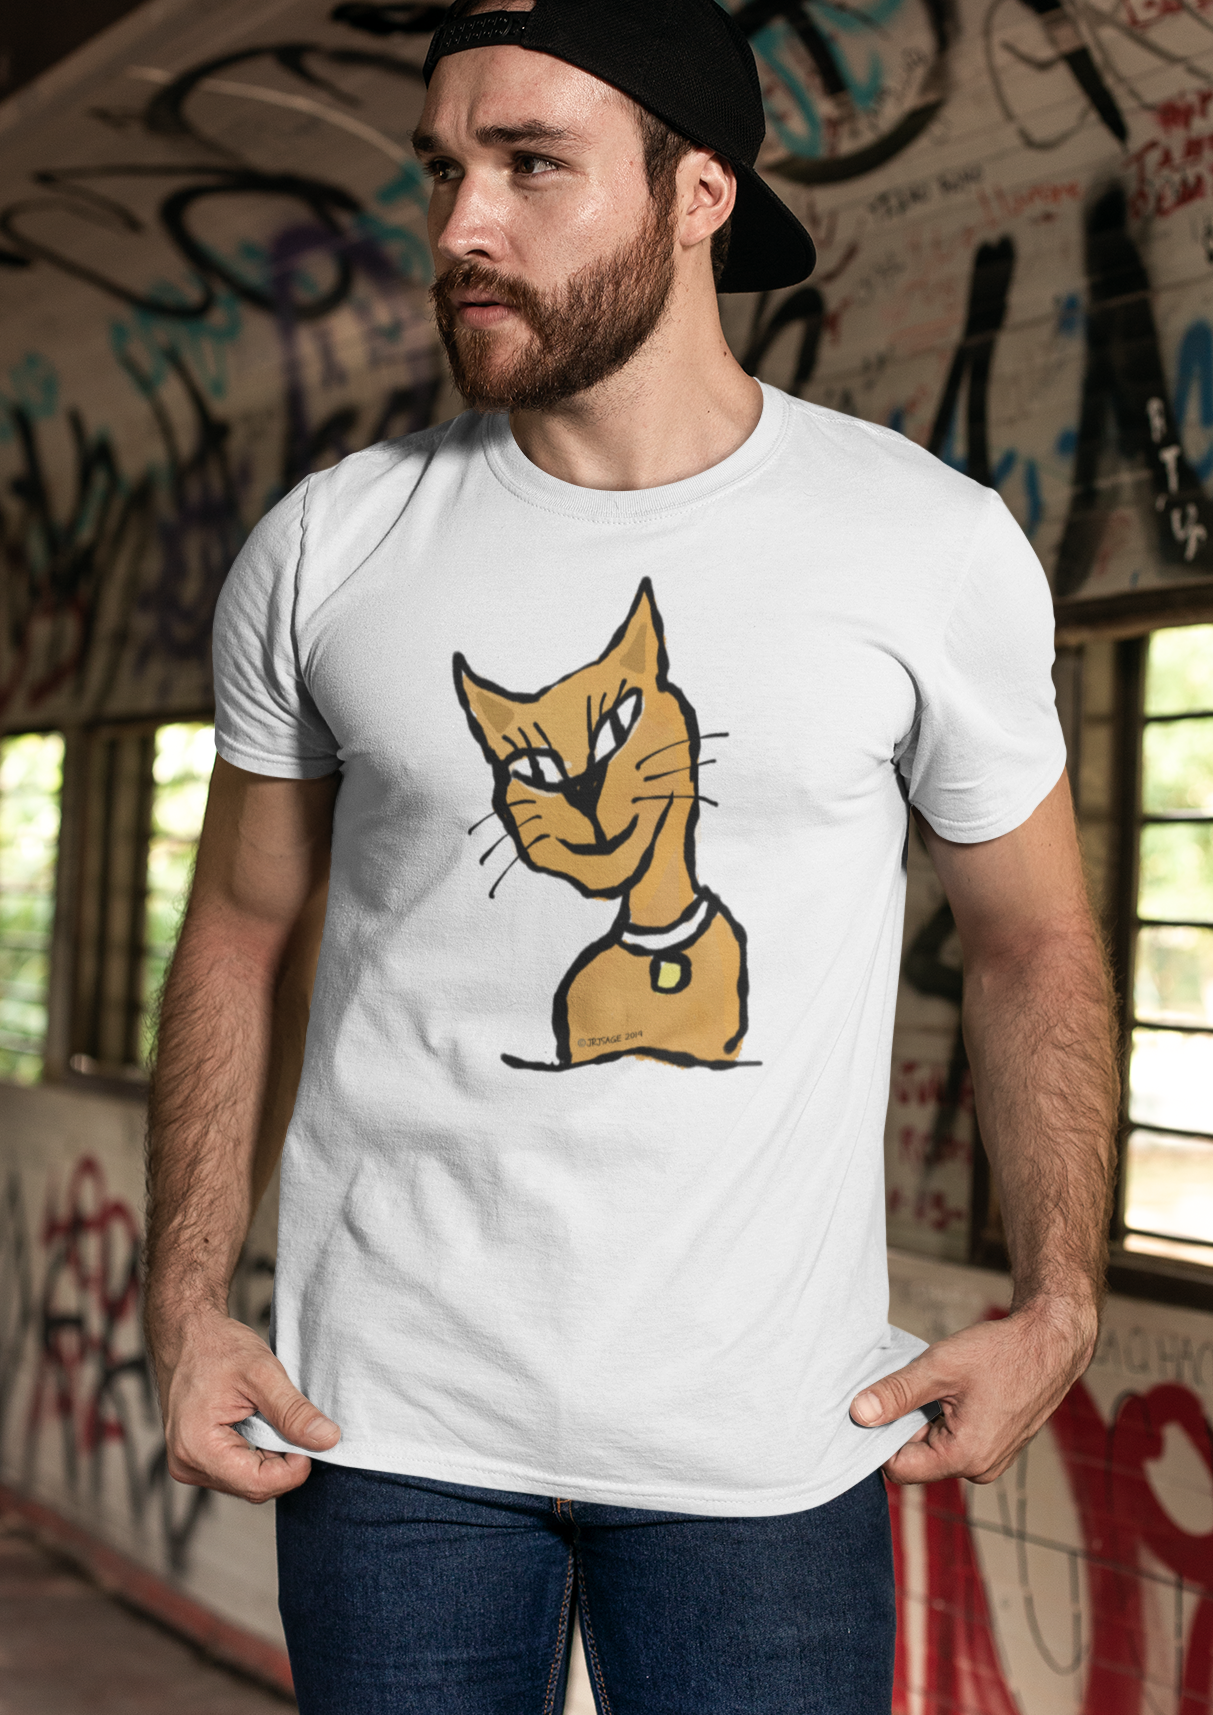 Ginger Cat T-shirt - Young man wearing an Illustrated white colour vegan cotton Cat T-shirt by Hector and Bone